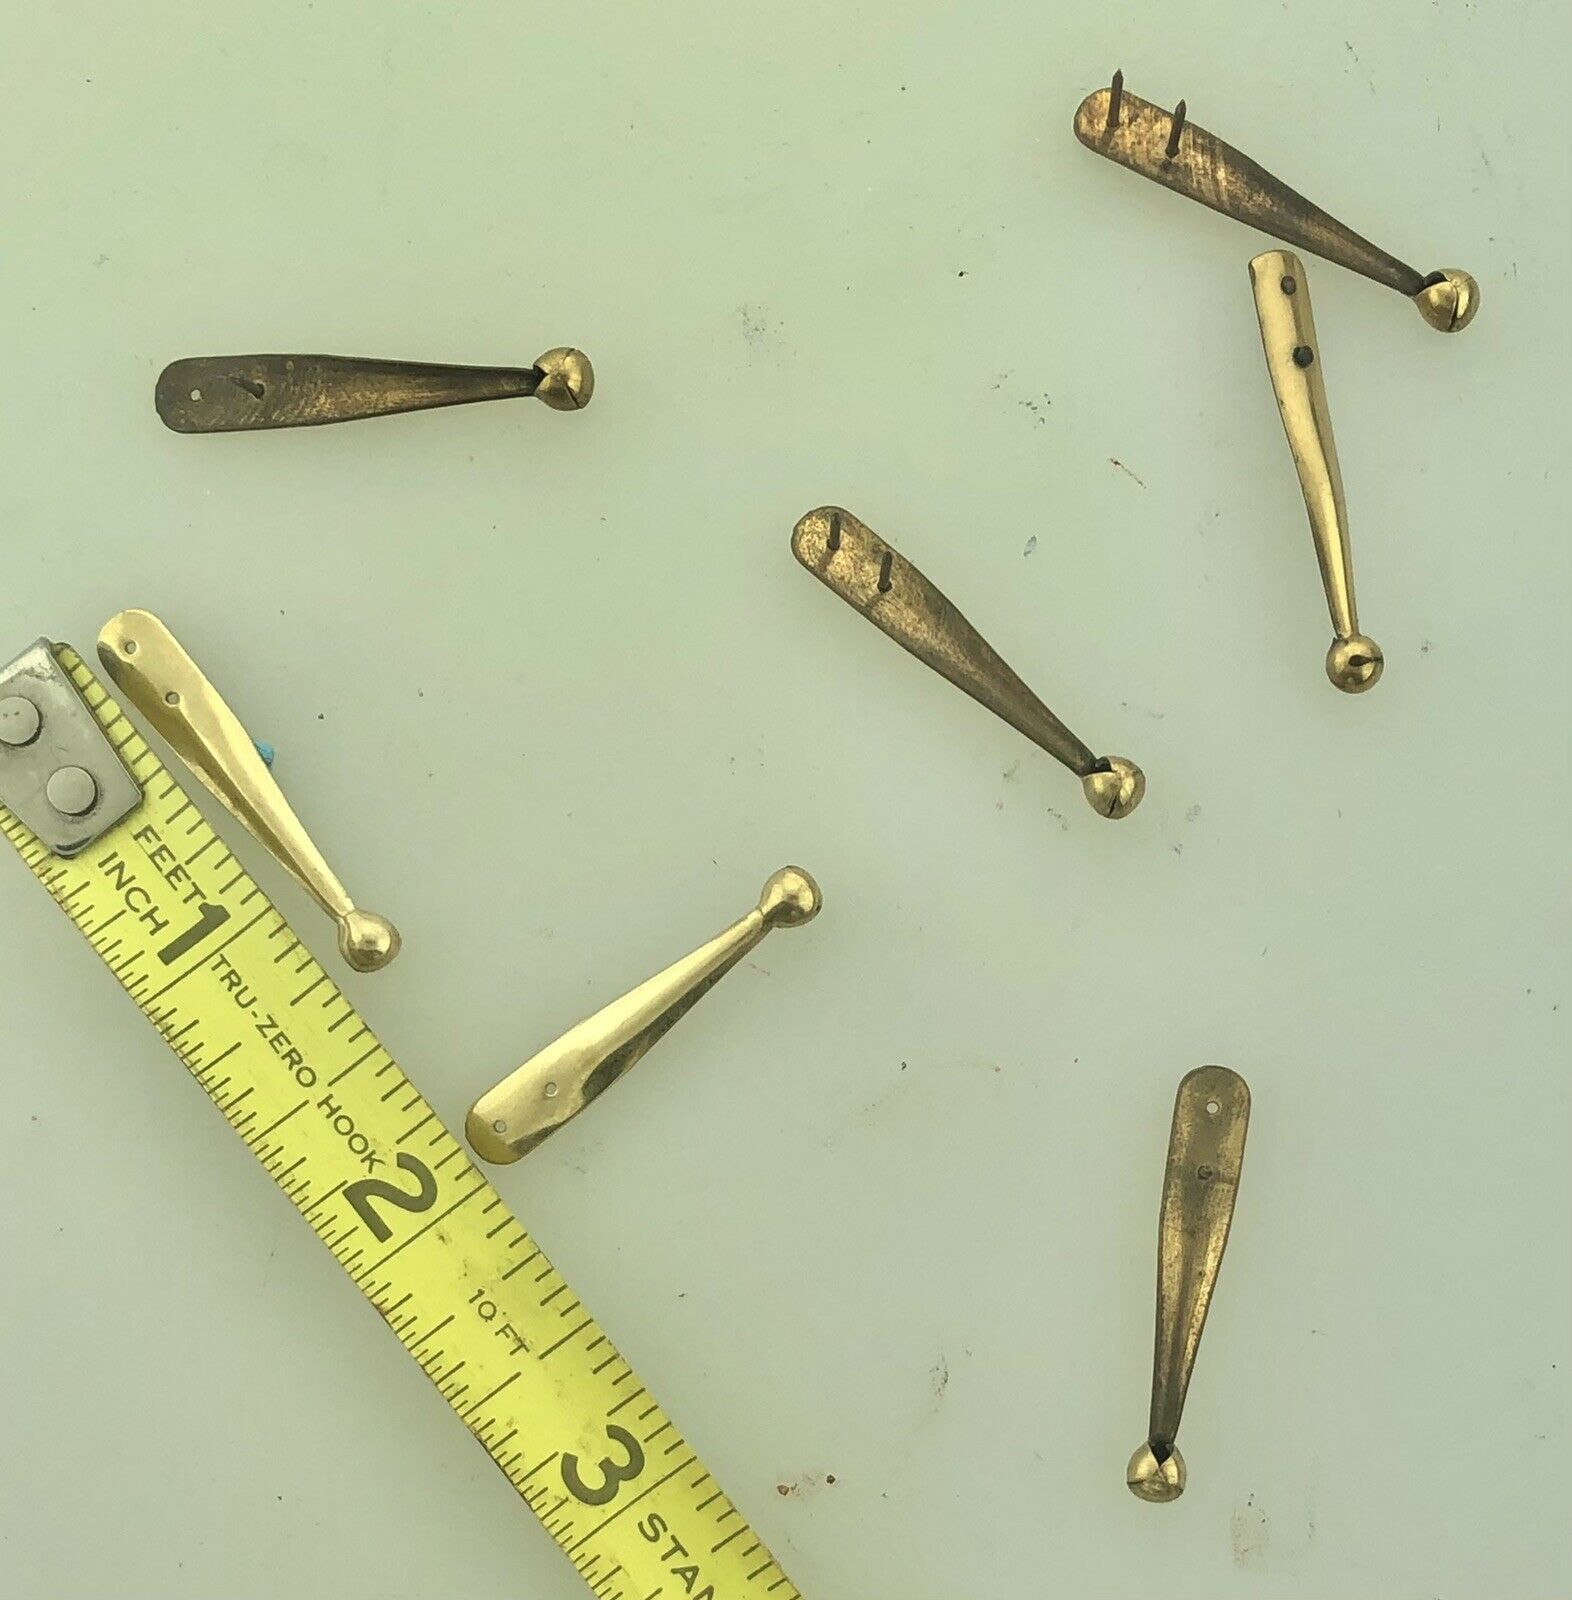 One Waterman Style Rivet Clip New Old Stock (nos) Gold Tone